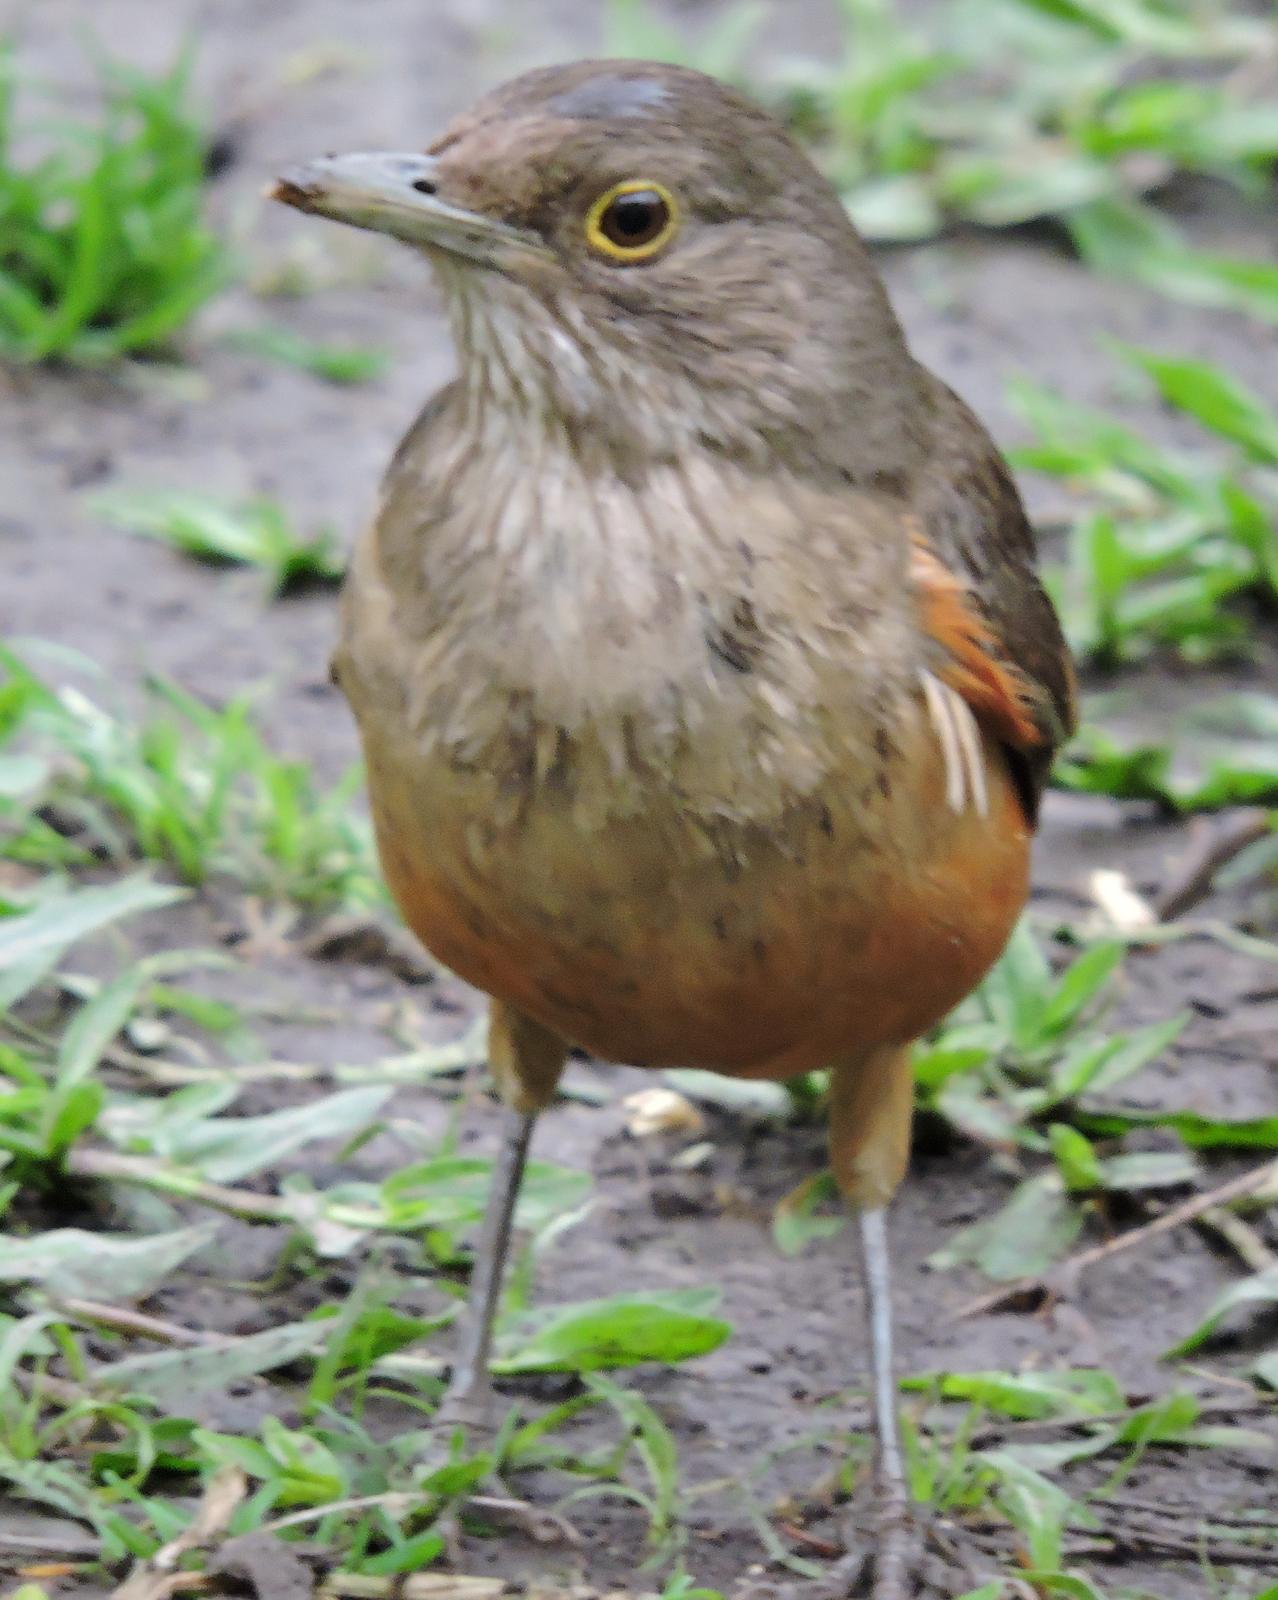 Rufous-bellied Thrush Photo by Peter Lowe